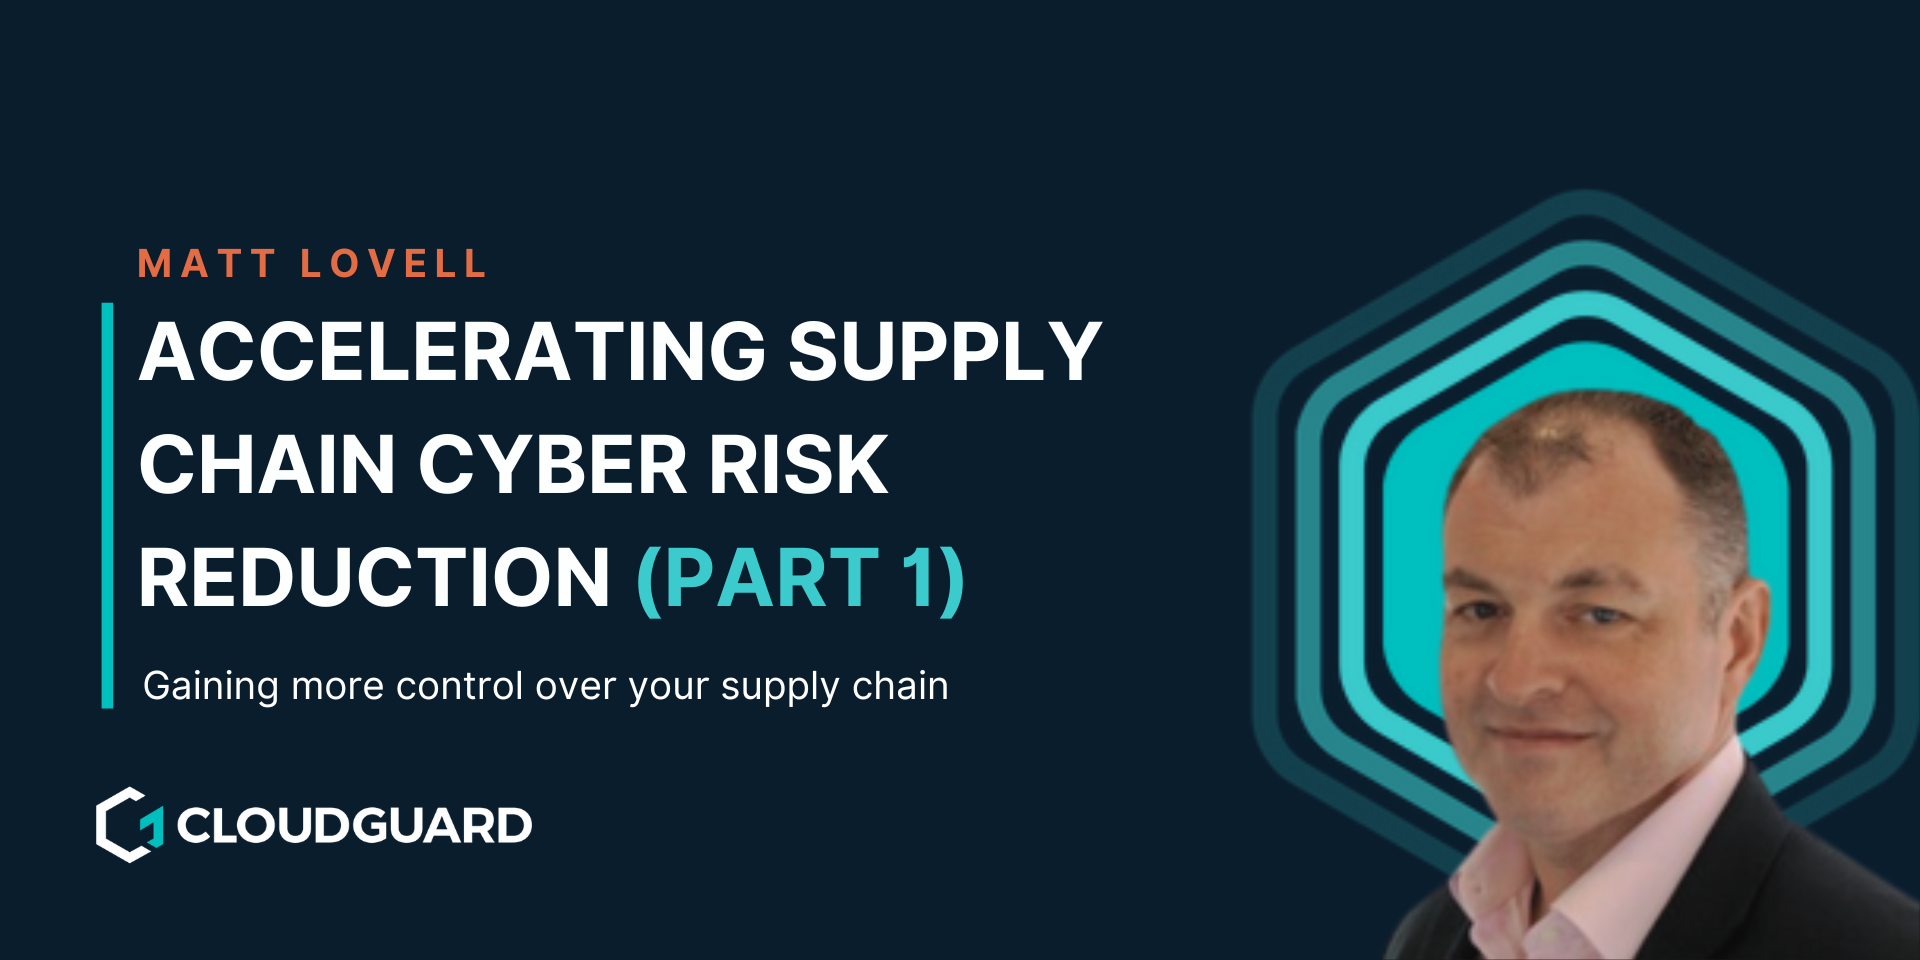 Accelerating Supply Chain Cyber Risk Reduction (Part 1)